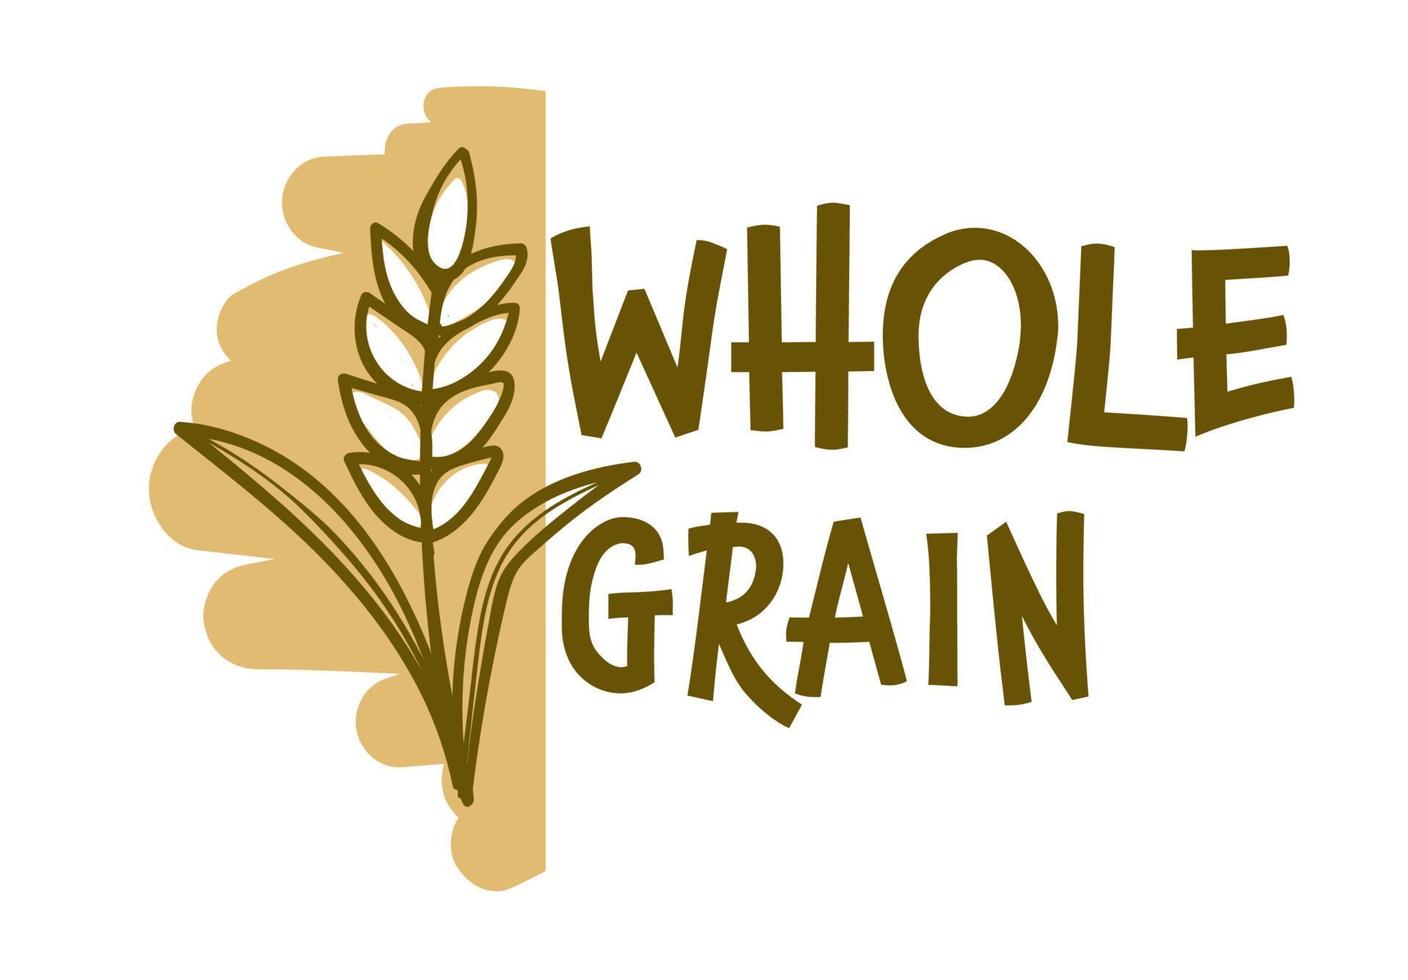 Whole grain, flour products, label for pastry vector